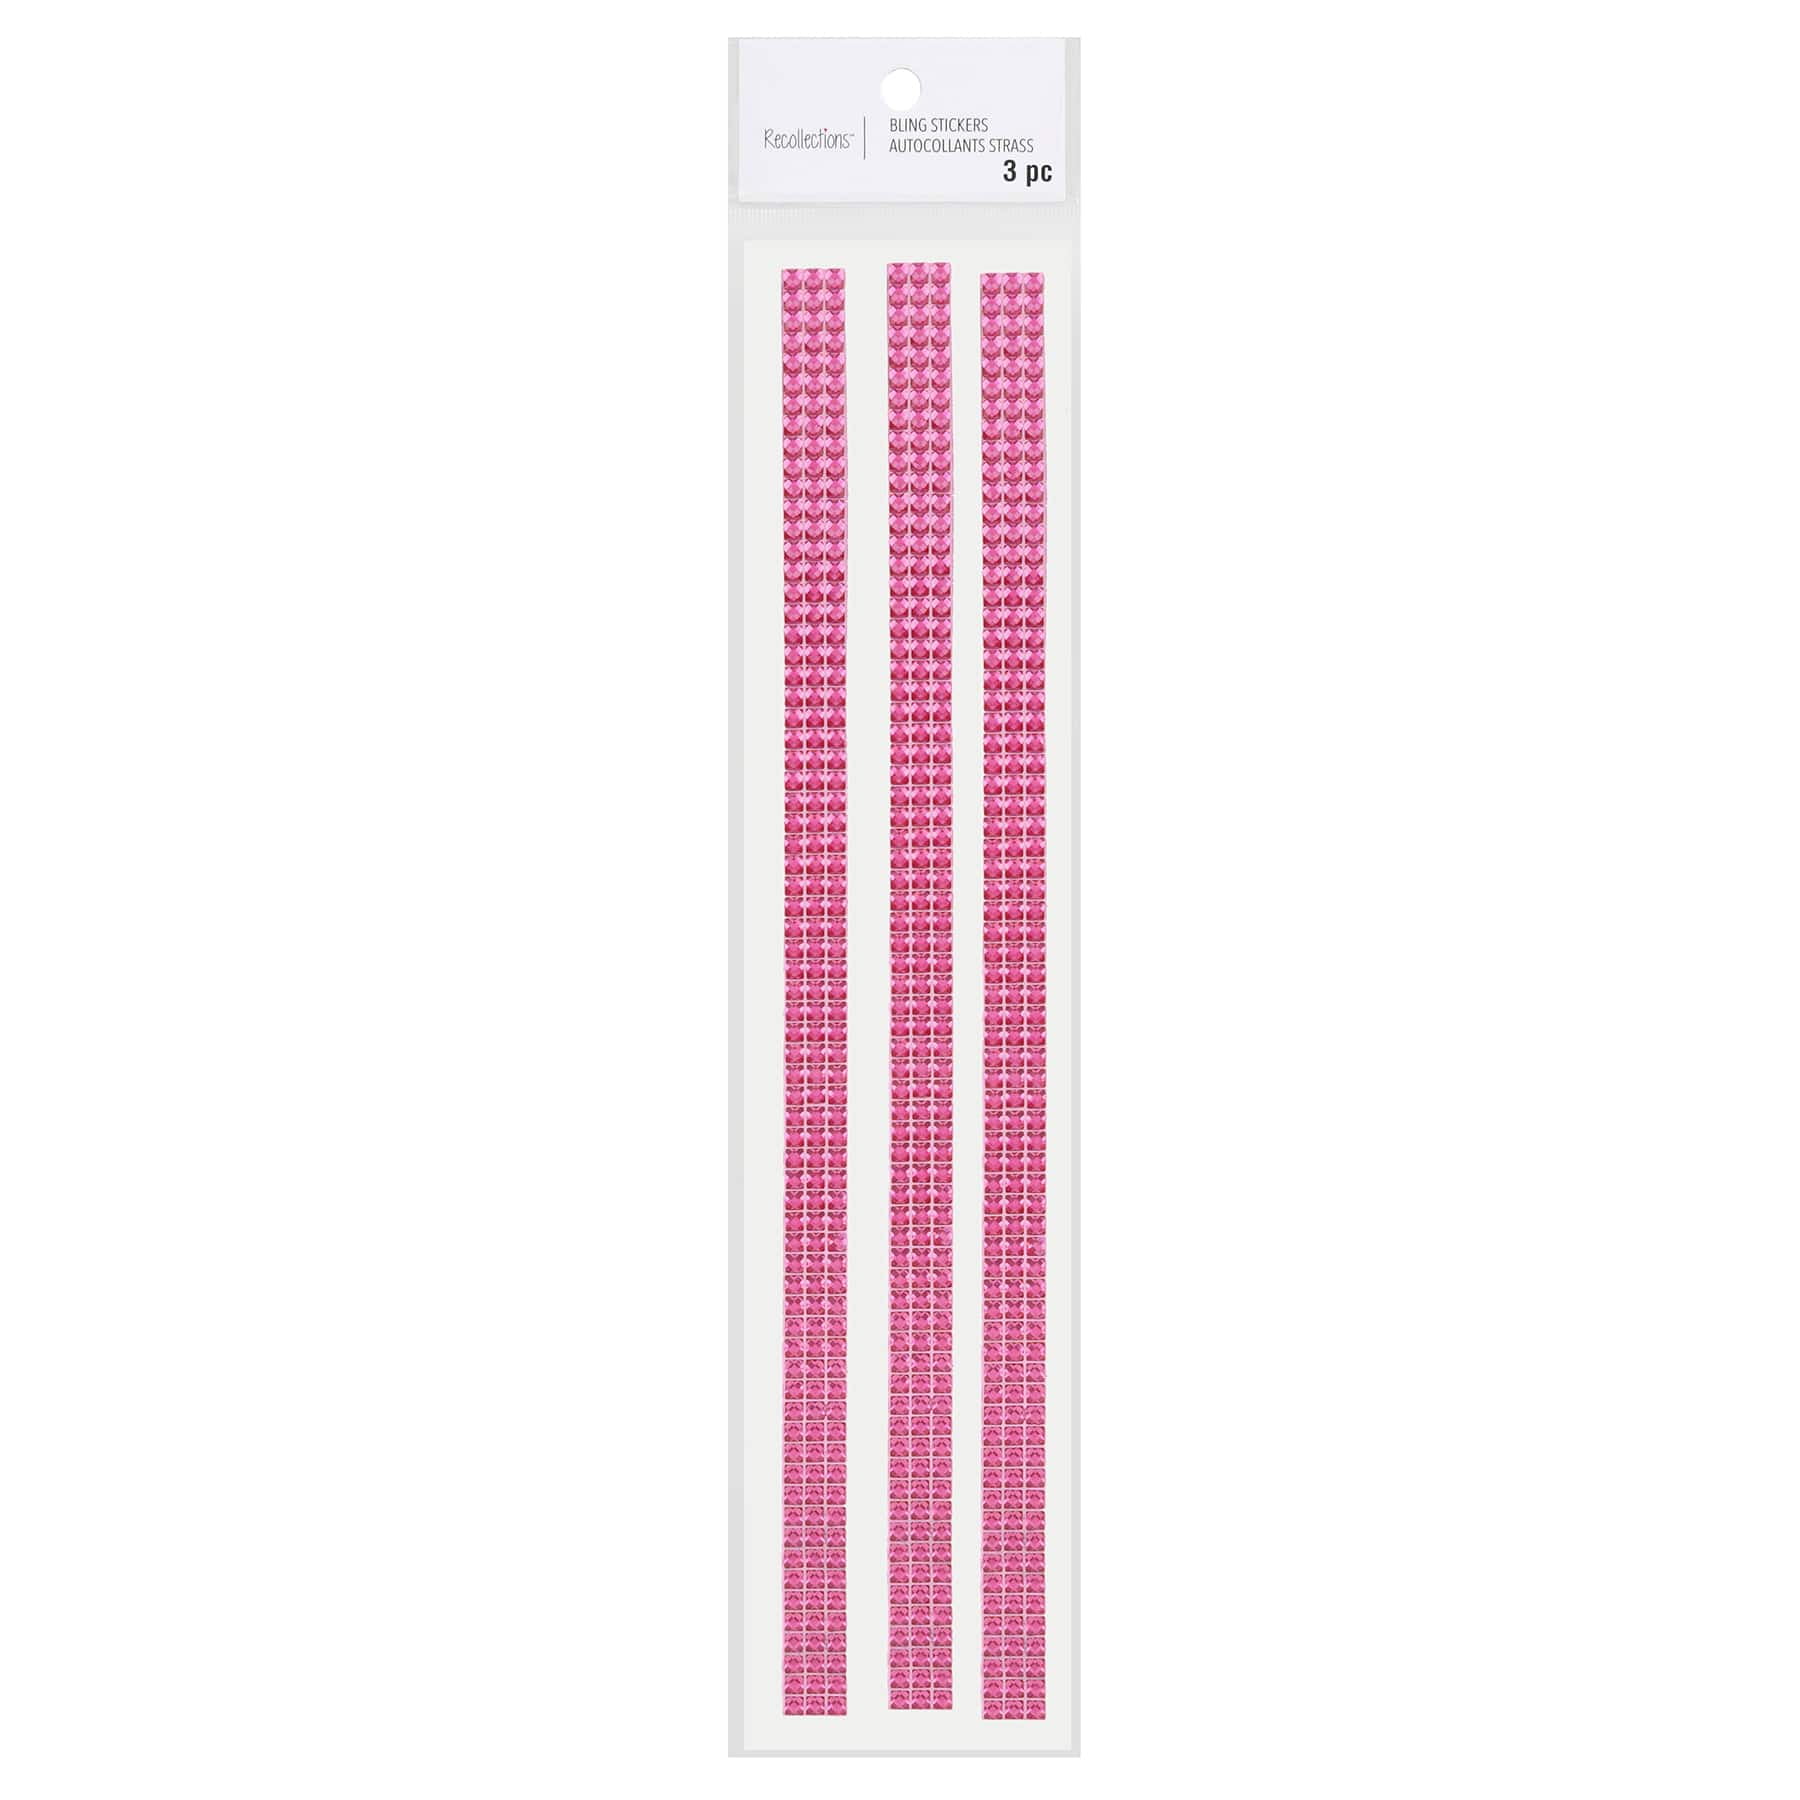 12 Packs: 3 ct. (36 total) Hot Pink Border Bling Stickers by Recollections™